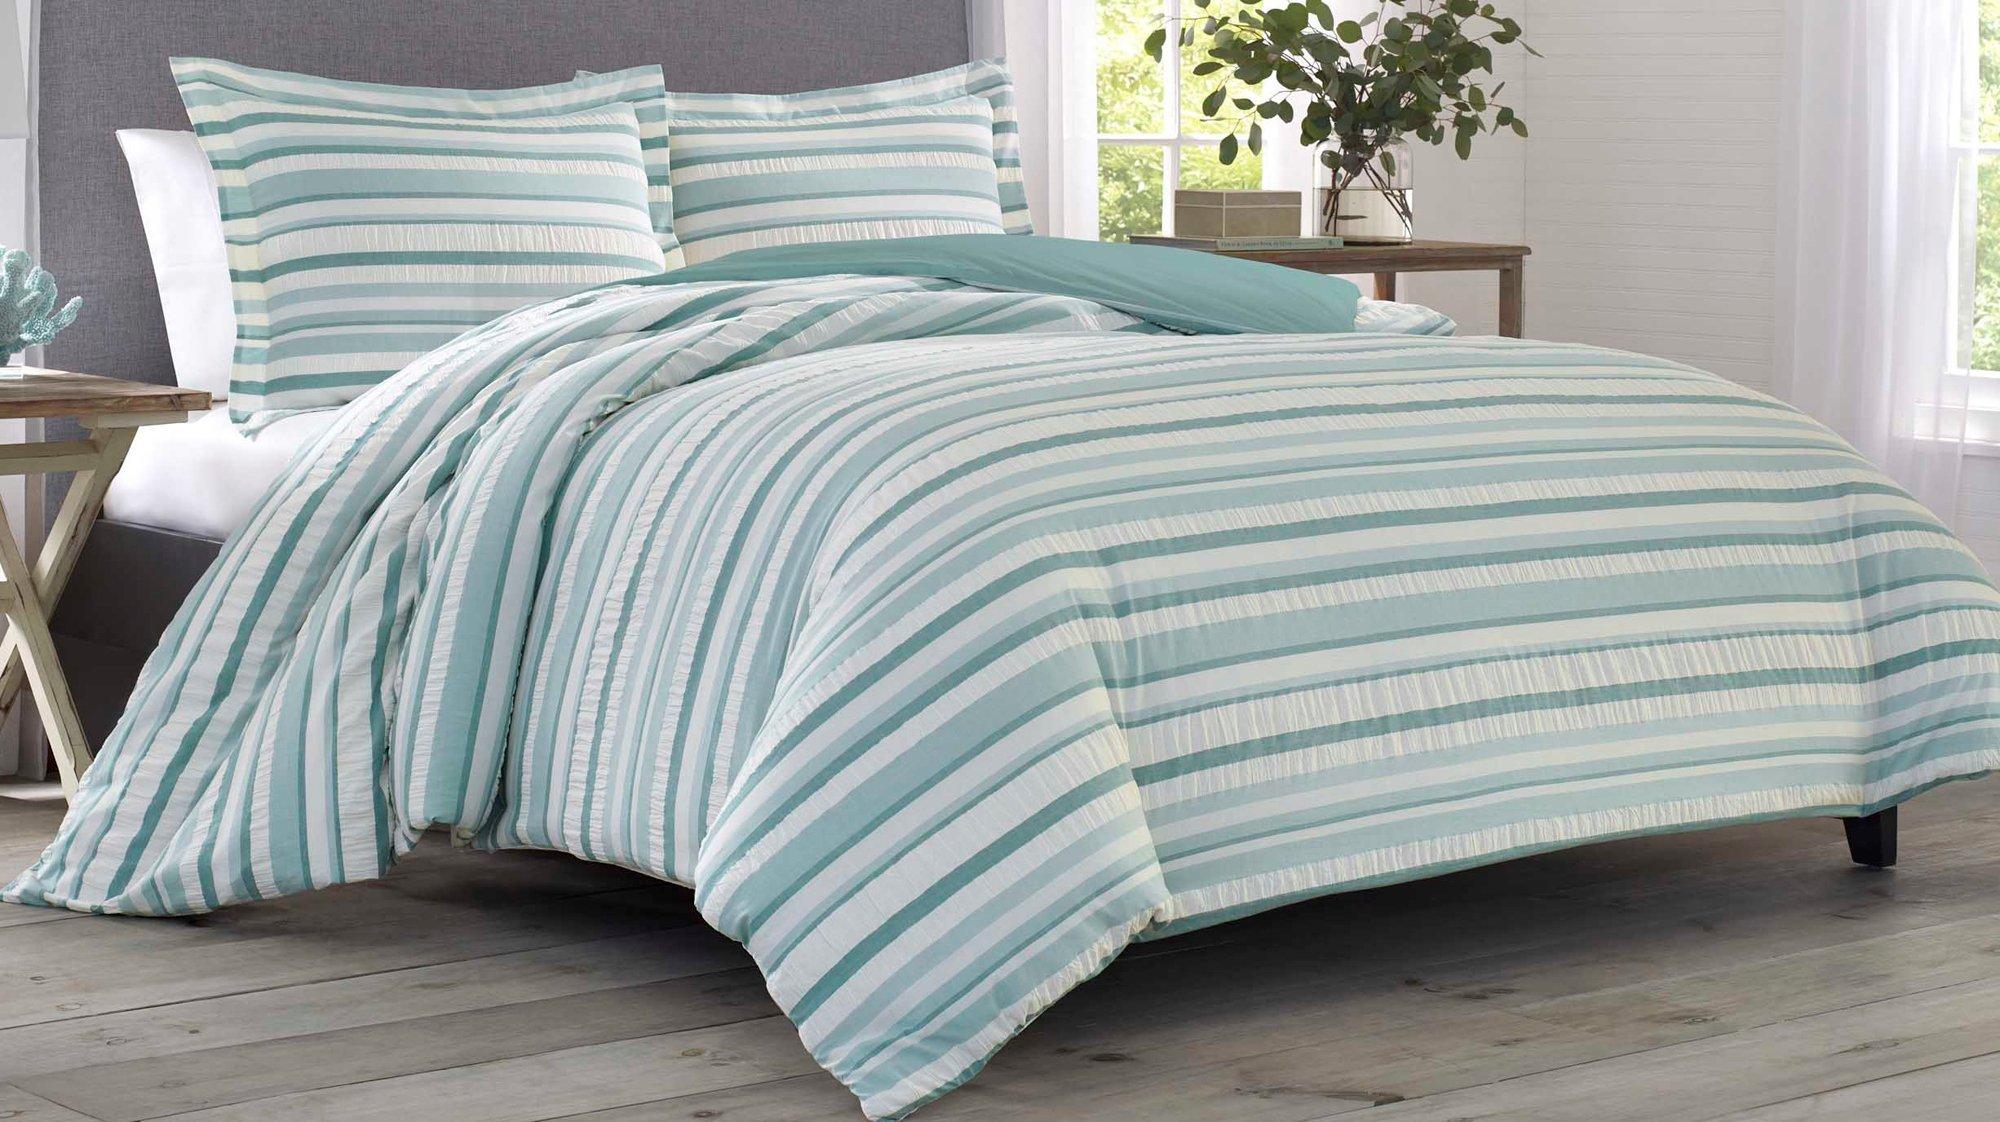 Tommy Bahama Clearwater Cay 3-pc. Duvet Cover Set